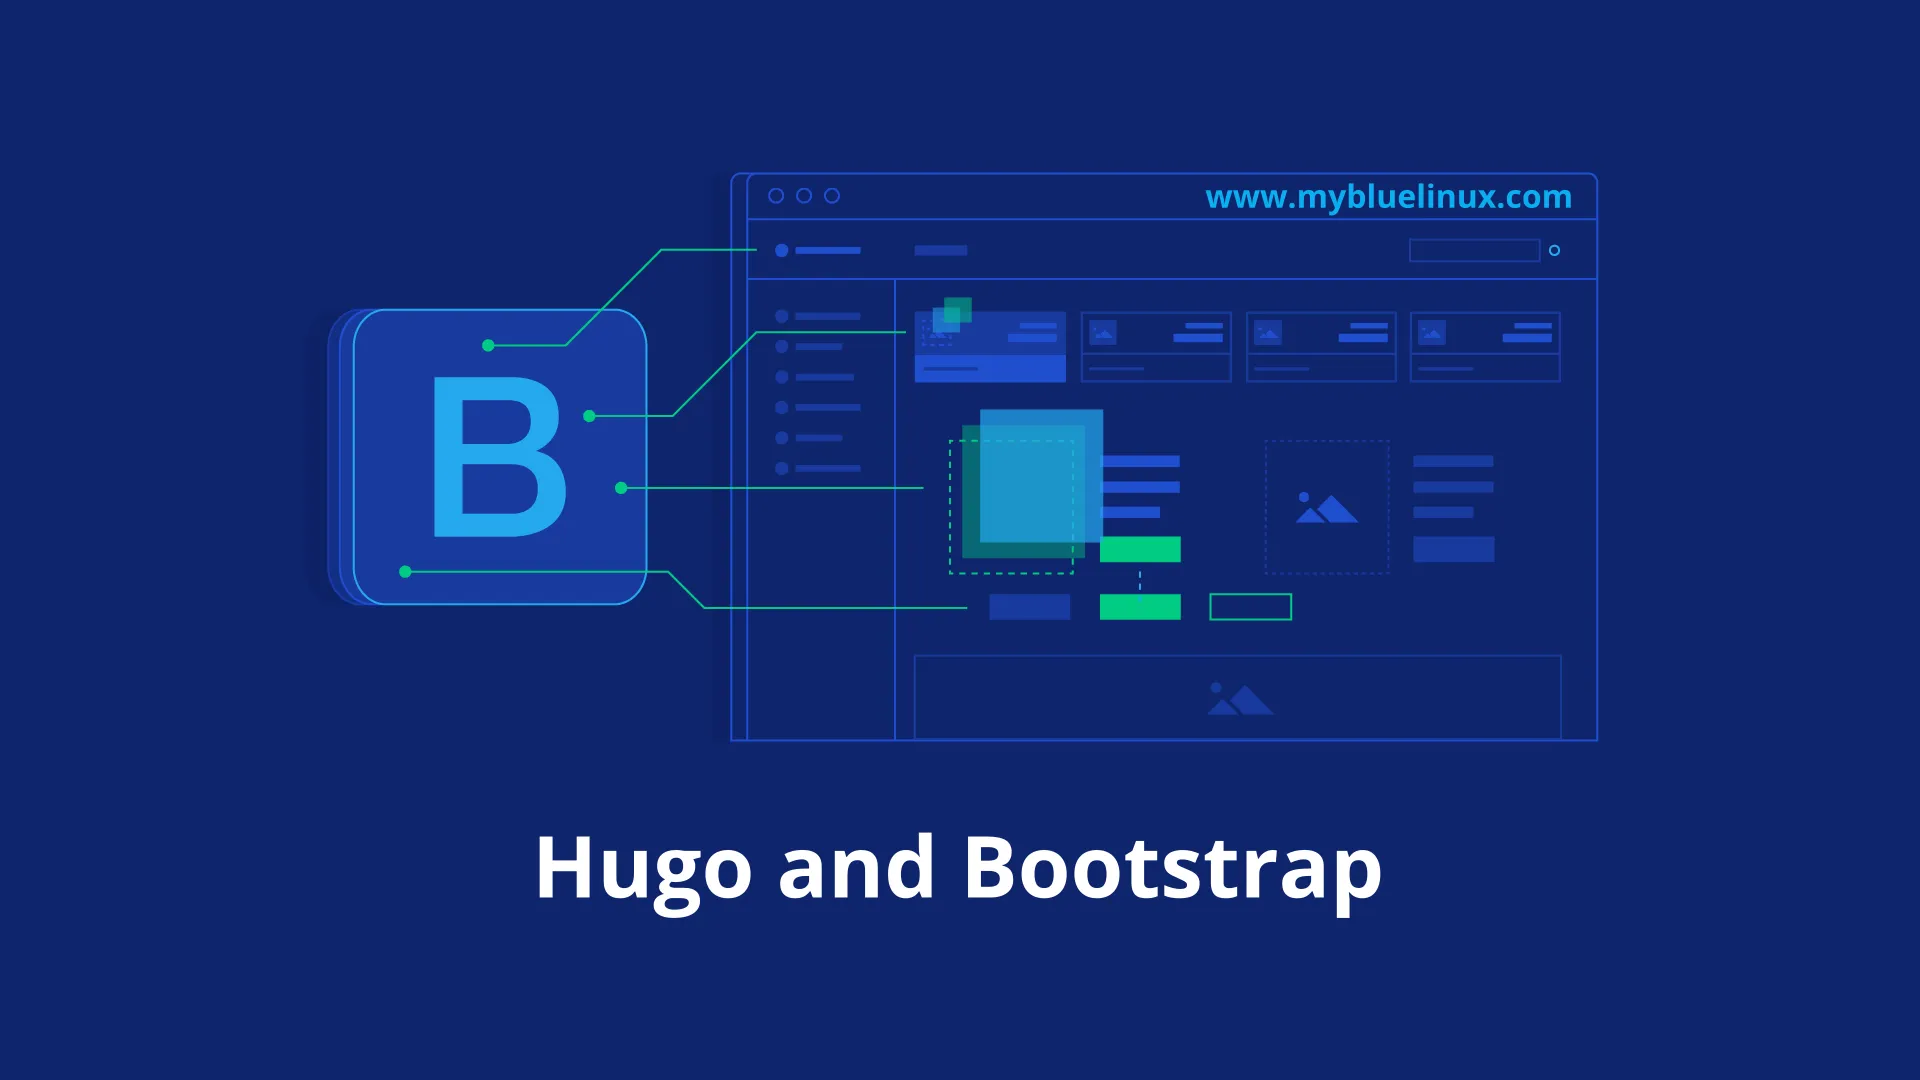 Hugo and Bootstrap Tips with Examples